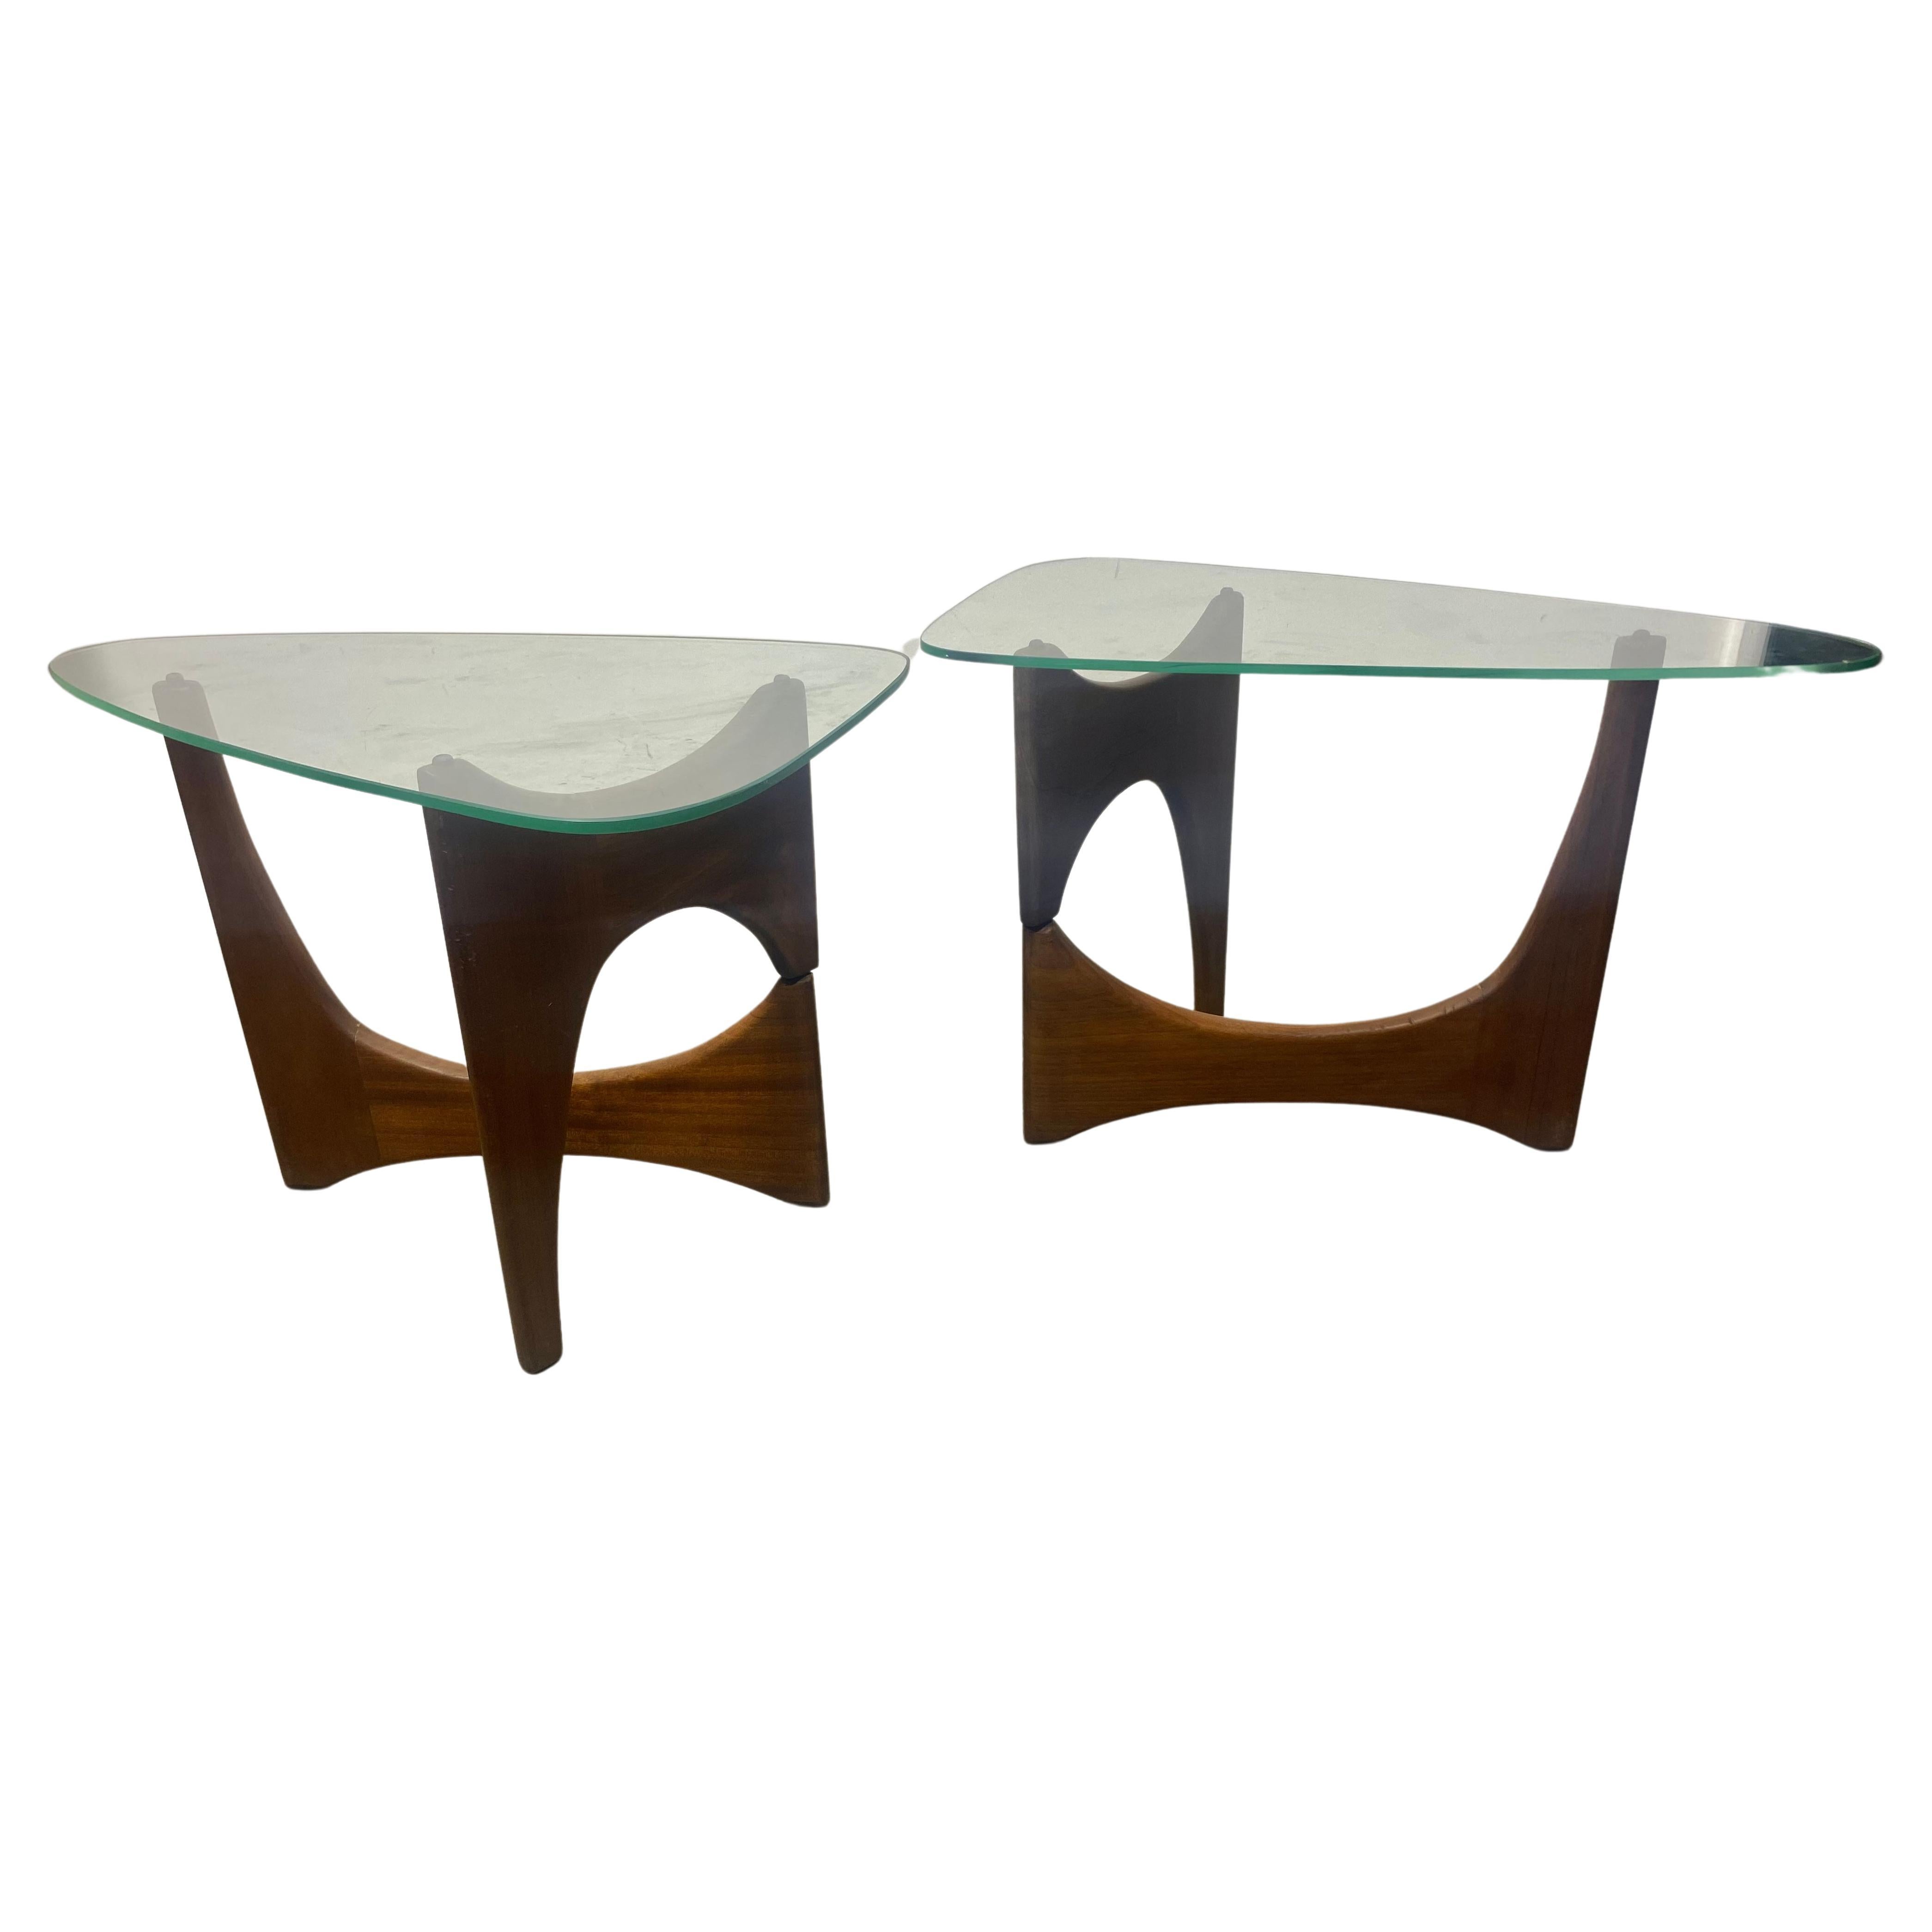 Pair Modernist Sculptural Walnut and Glass End Tables . Adrian Pearsall /Noguchi